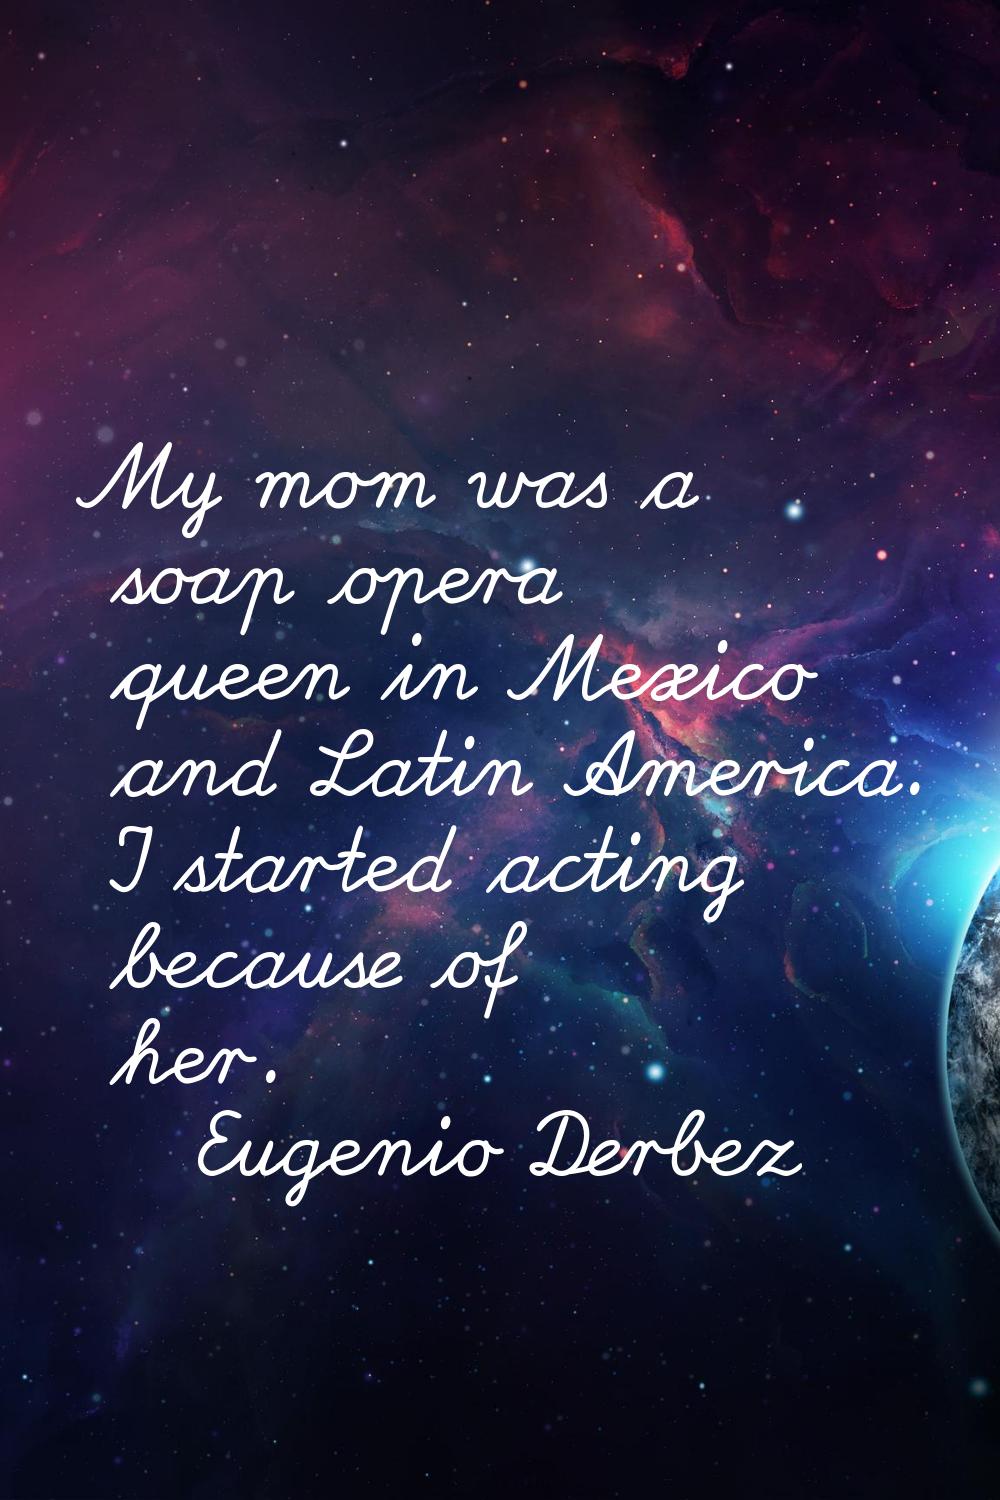 My mom was a soap opera queen in Mexico and Latin America. I started acting because of her.